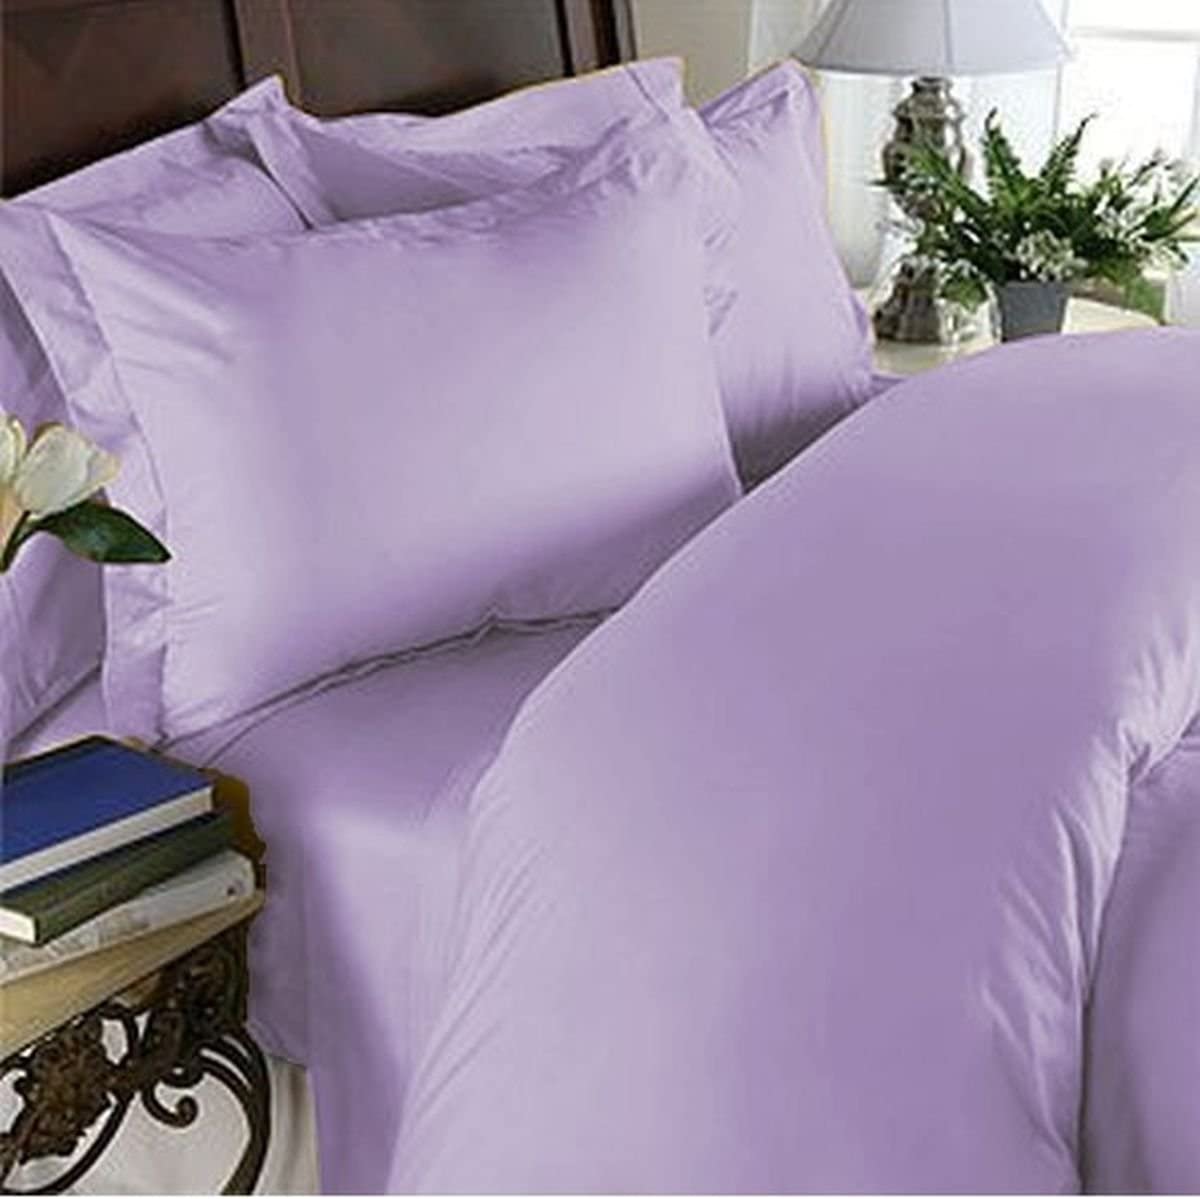 Buy Queen Size Flat Sheet Lavender Egyptian Cotton 1000TC at- Egyptianhomelinens.com